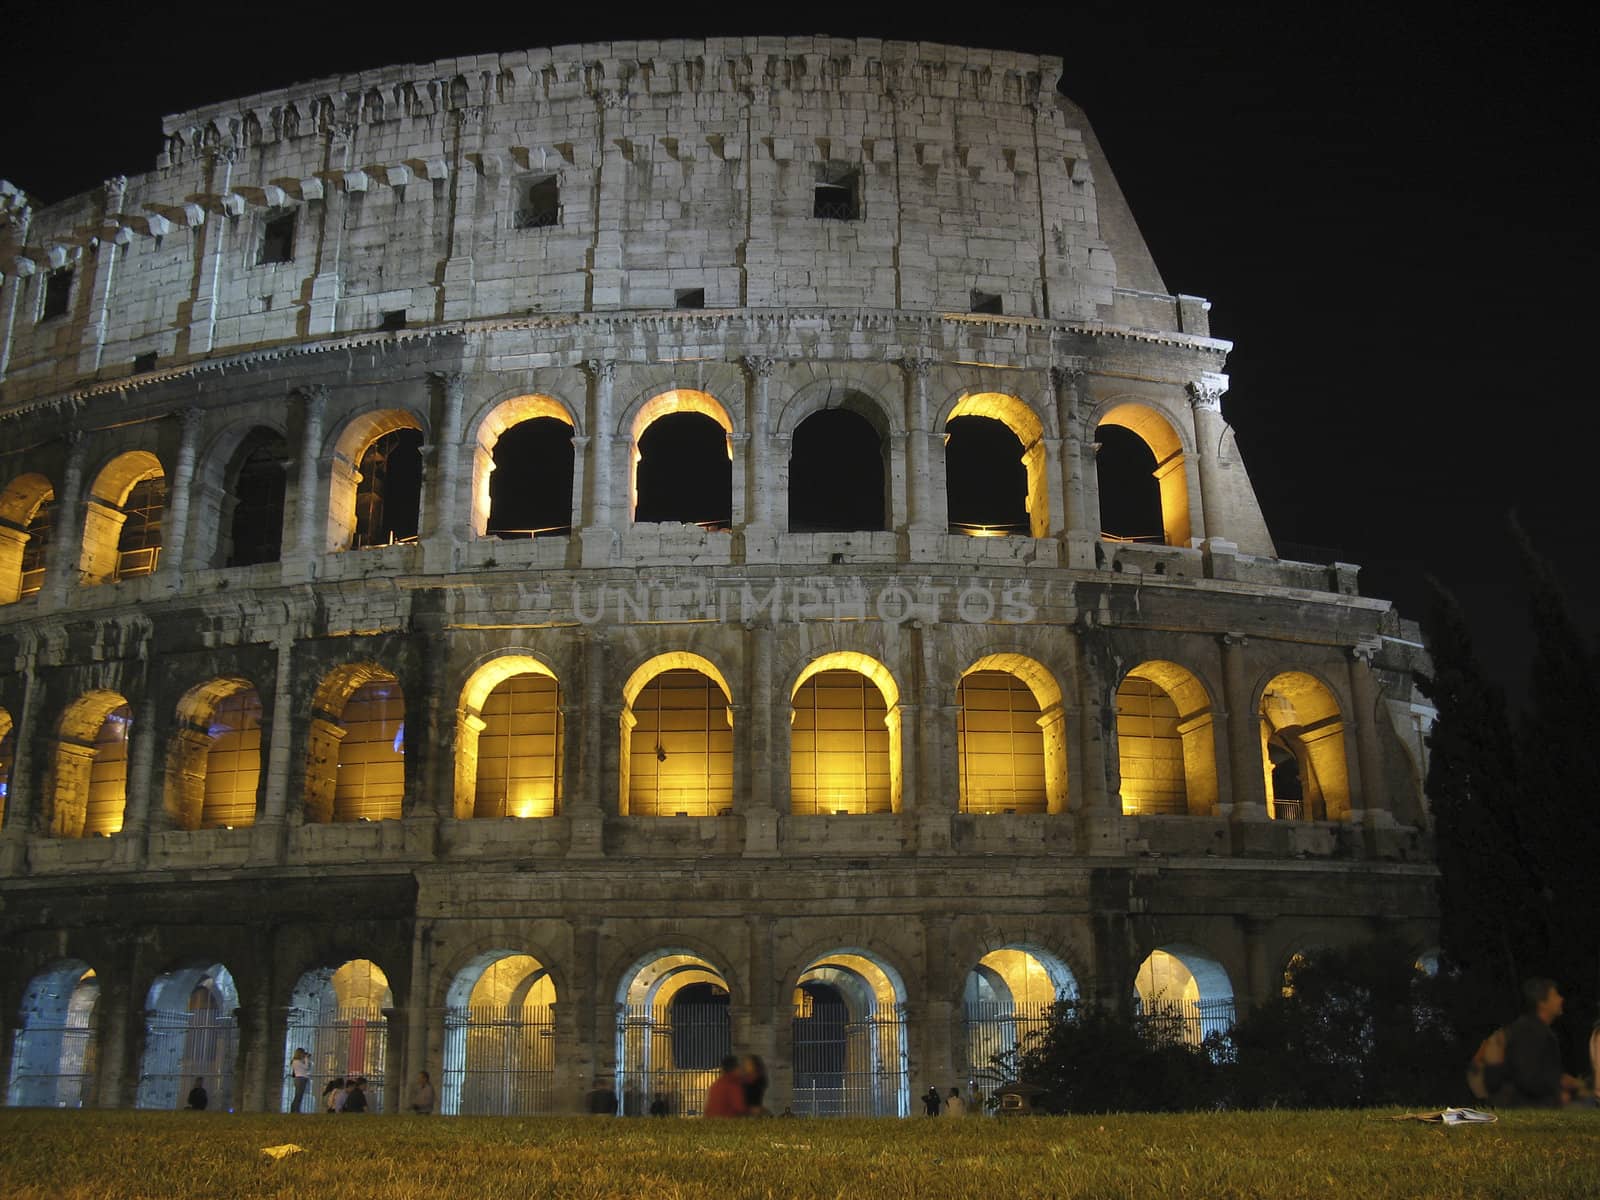 Night shot of the Coliseum in Rome, Italy, originally know as the Flavian Amphitheatre